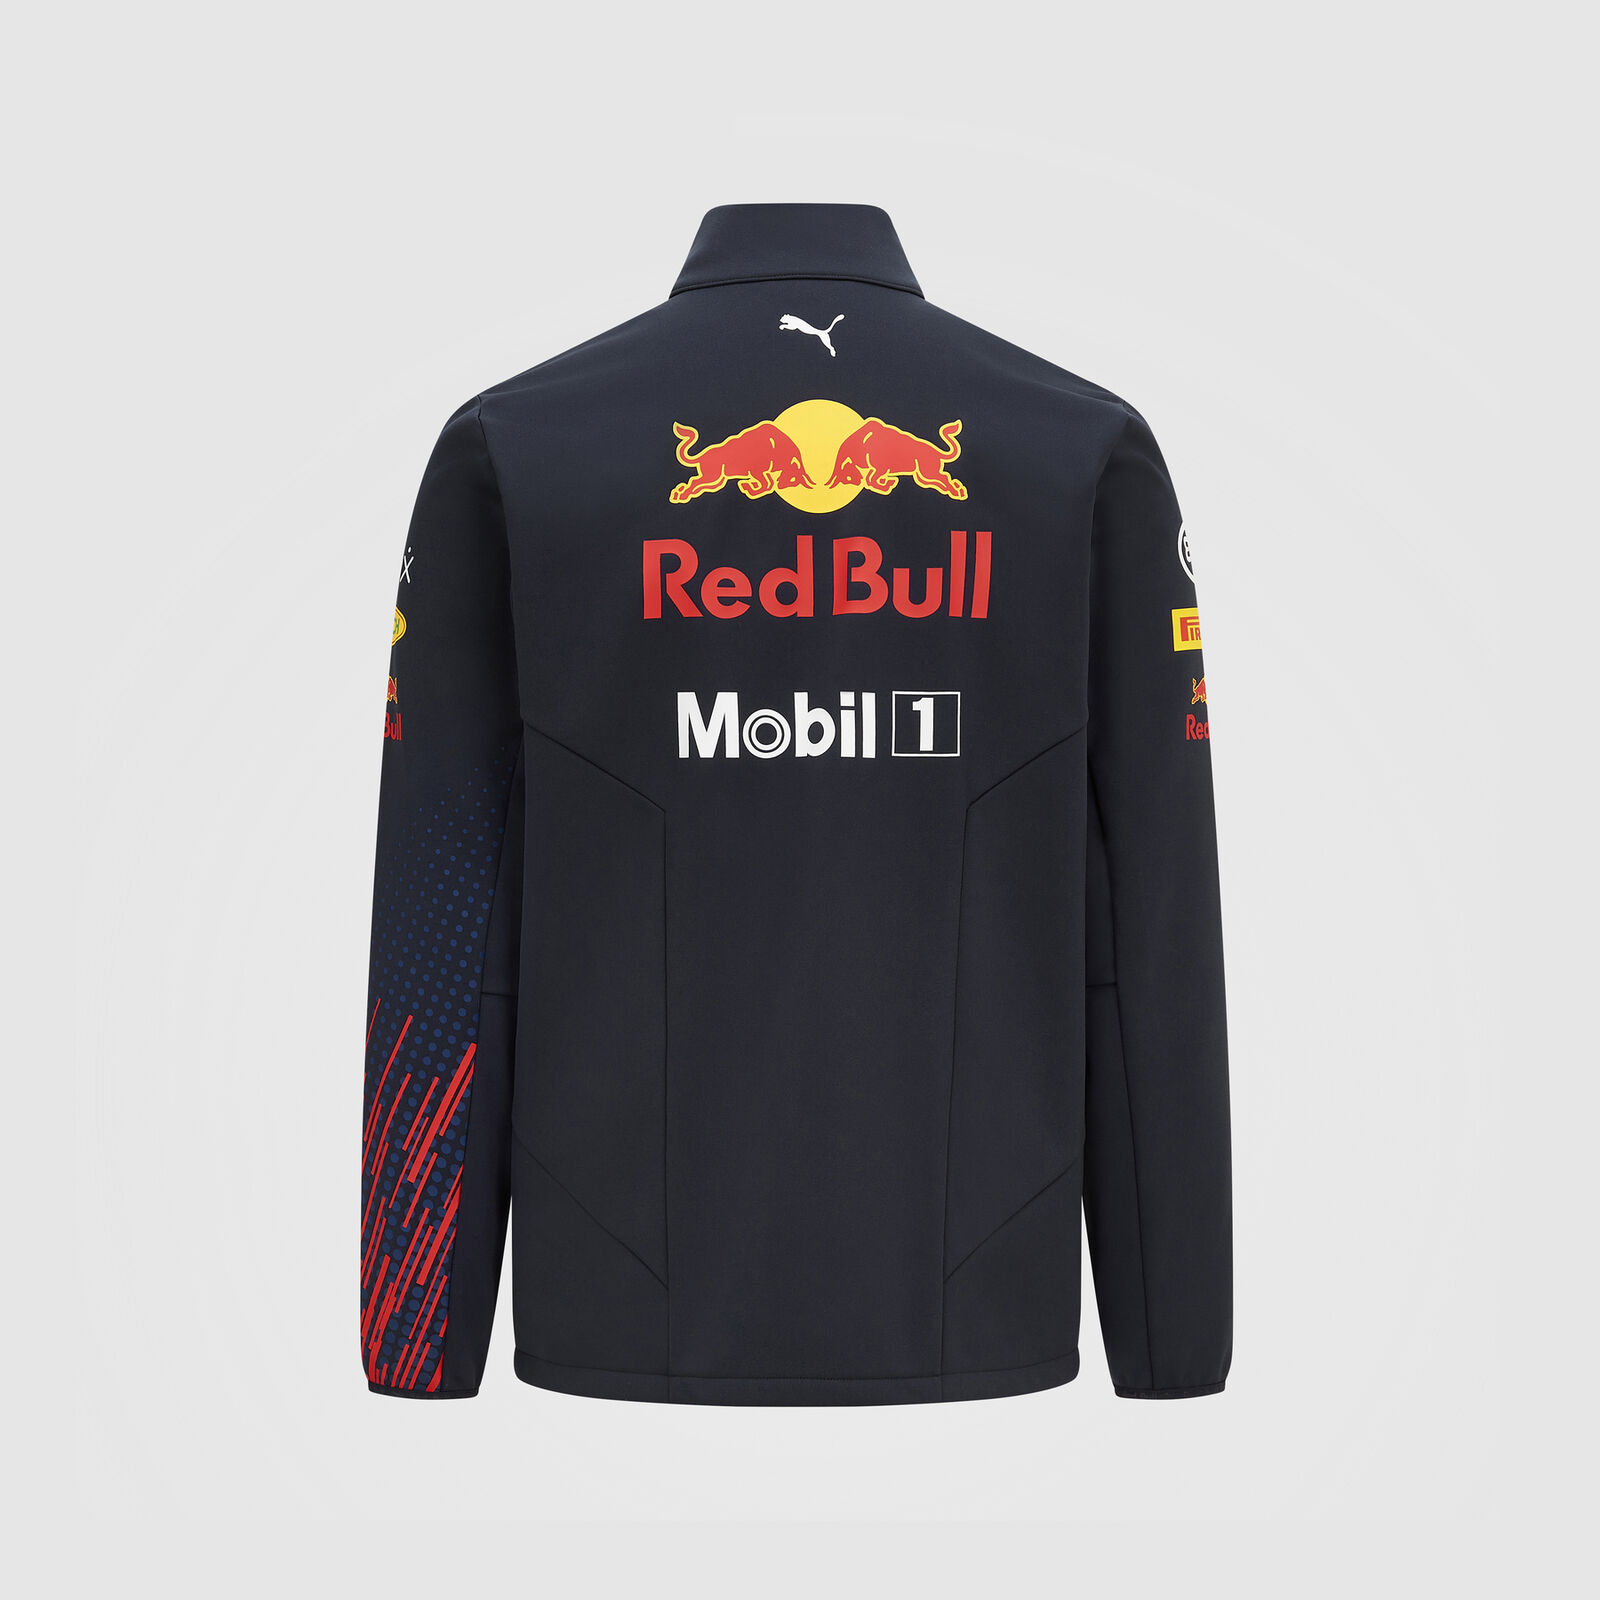 2021 Team Jacket - Bull Racing | For Fans